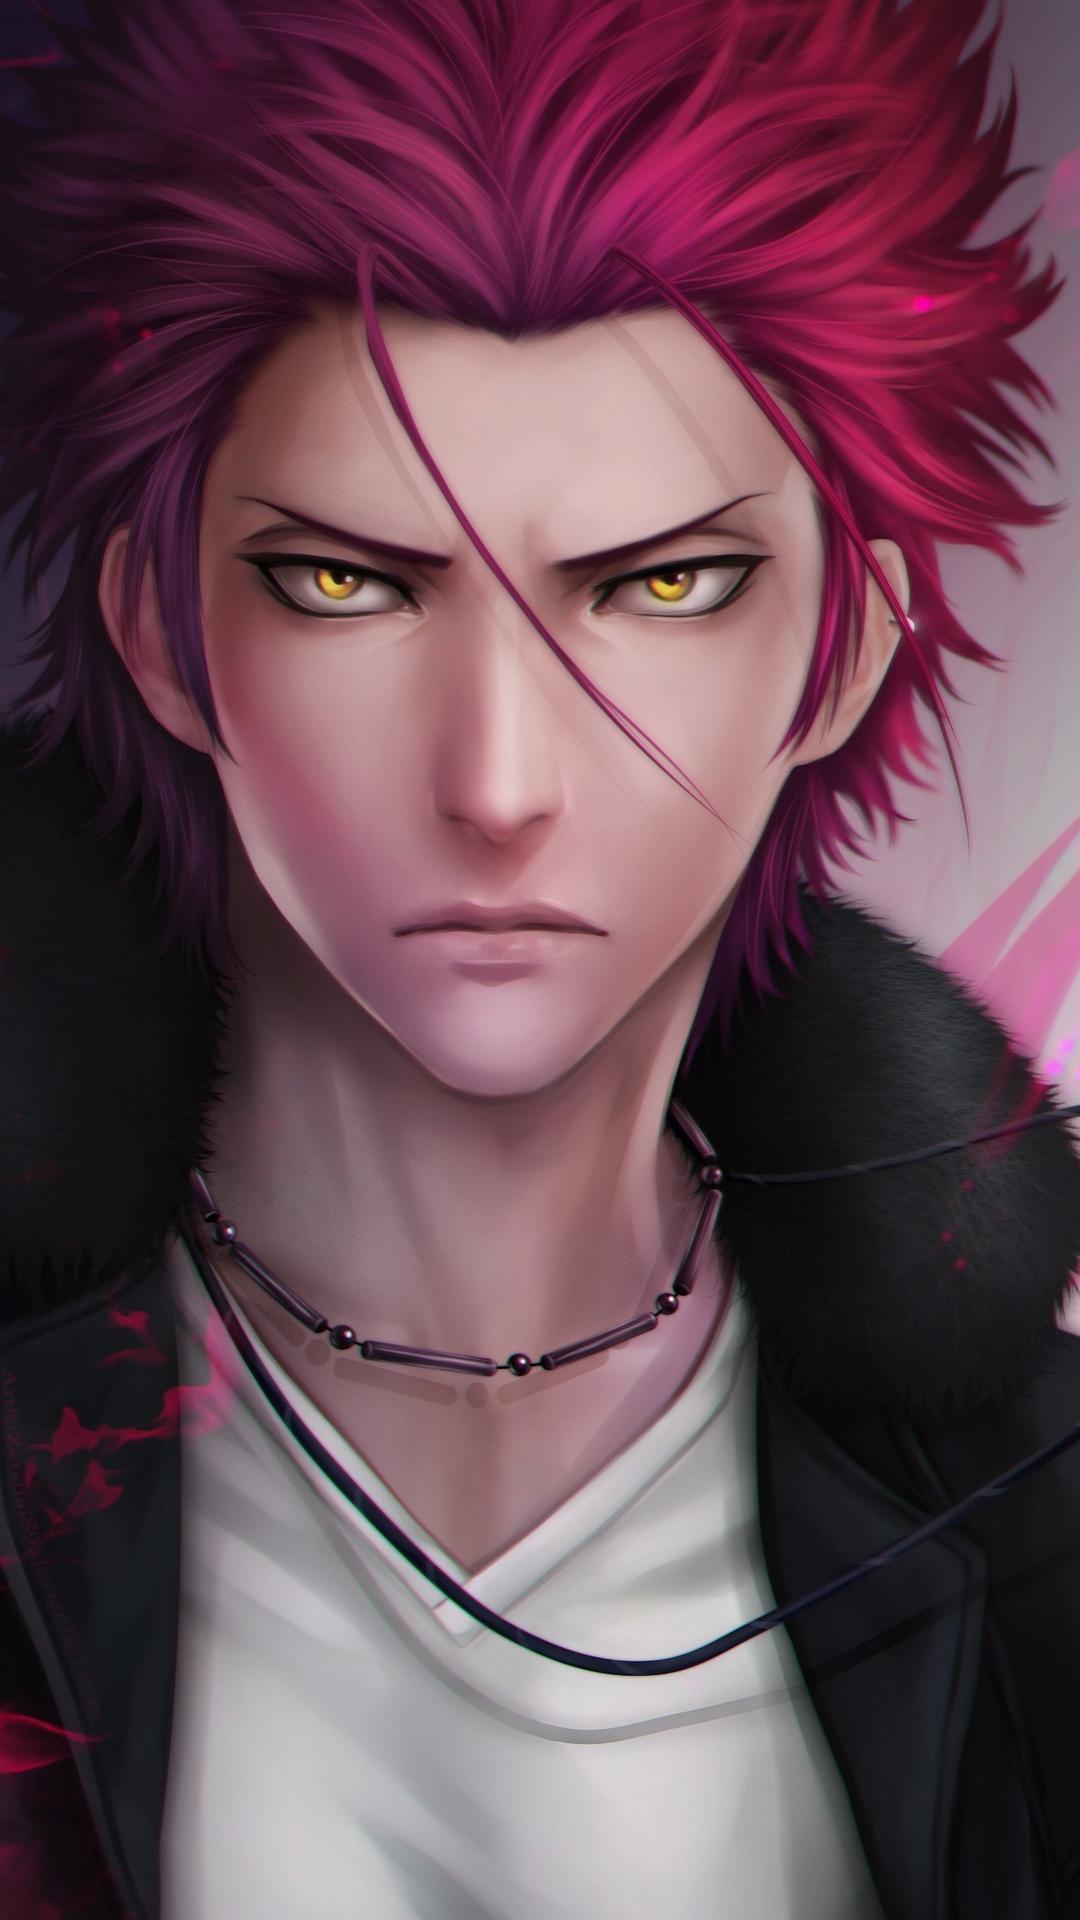 Download wallpaper 1080x1920 suoh mikoto, project k, anime, guy